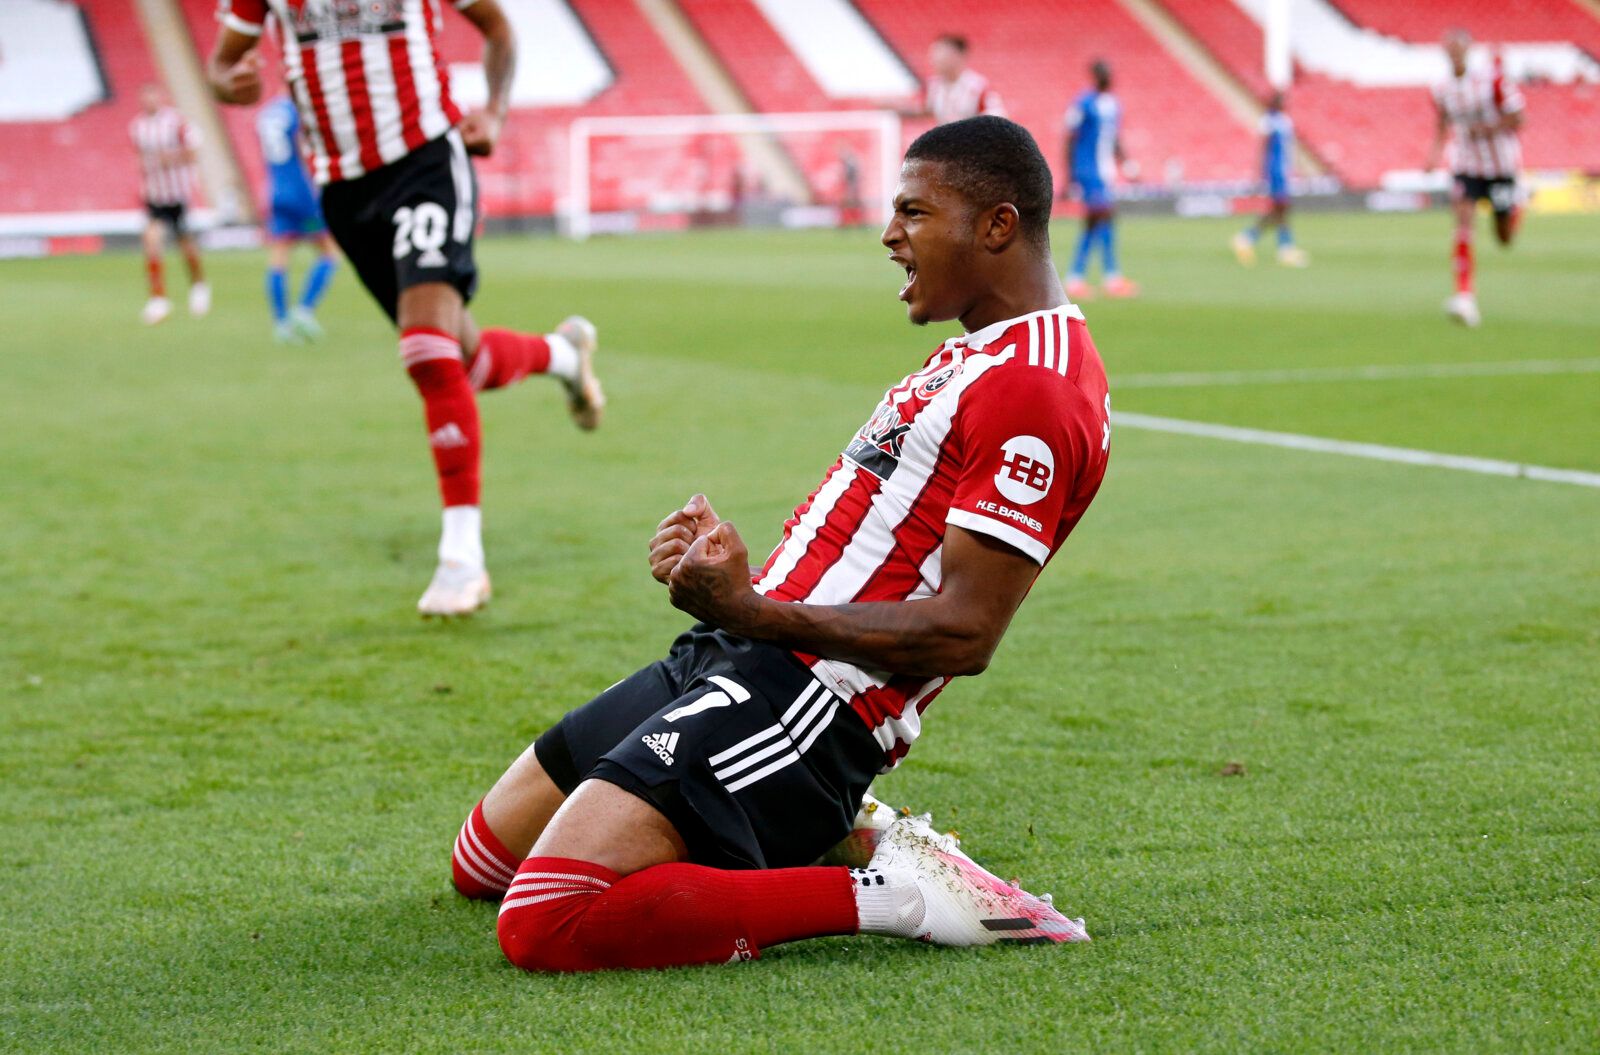 Soccer Football - Carabao Cup - First Round - Sheffield United v Carlisle United - Bramall Lane, Sheffield, Britain - August 10, 2021 Sheffield United's Rhian Brewster celebrates scoring their first goal Action Images/Ed Sykes EDITORIAL USE ONLY. No use with unauthorized audio, video, data, fixture lists, club/league logos or 'live' services. Online in-match use limited to 75 images, no video emulation. No use in betting, games or single club /league/player publications.  Please contact your acc